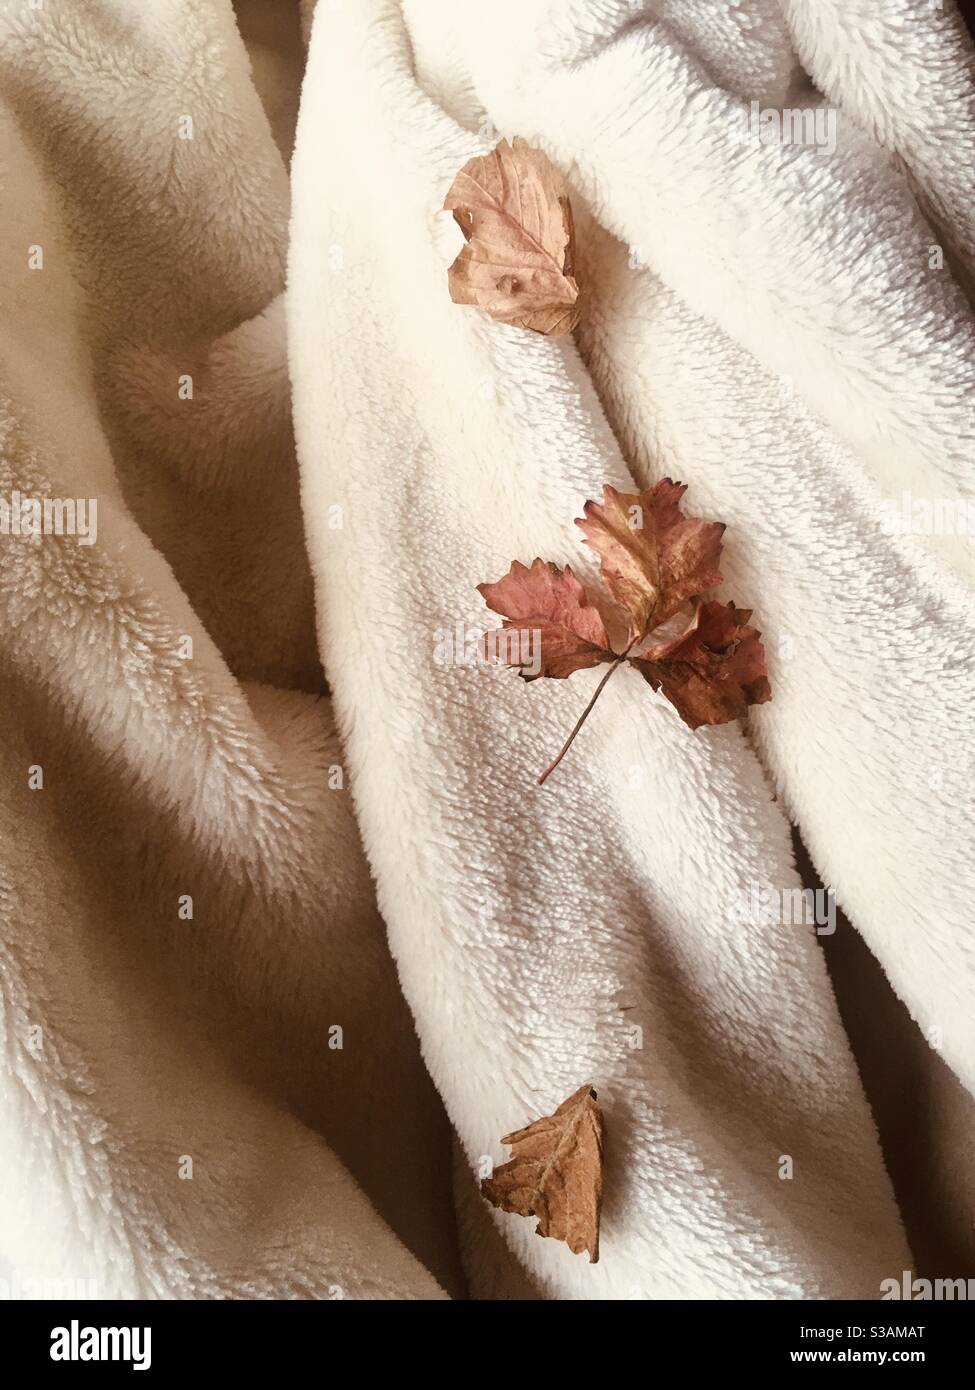 Autumn leaves on a blanket Stock Photo